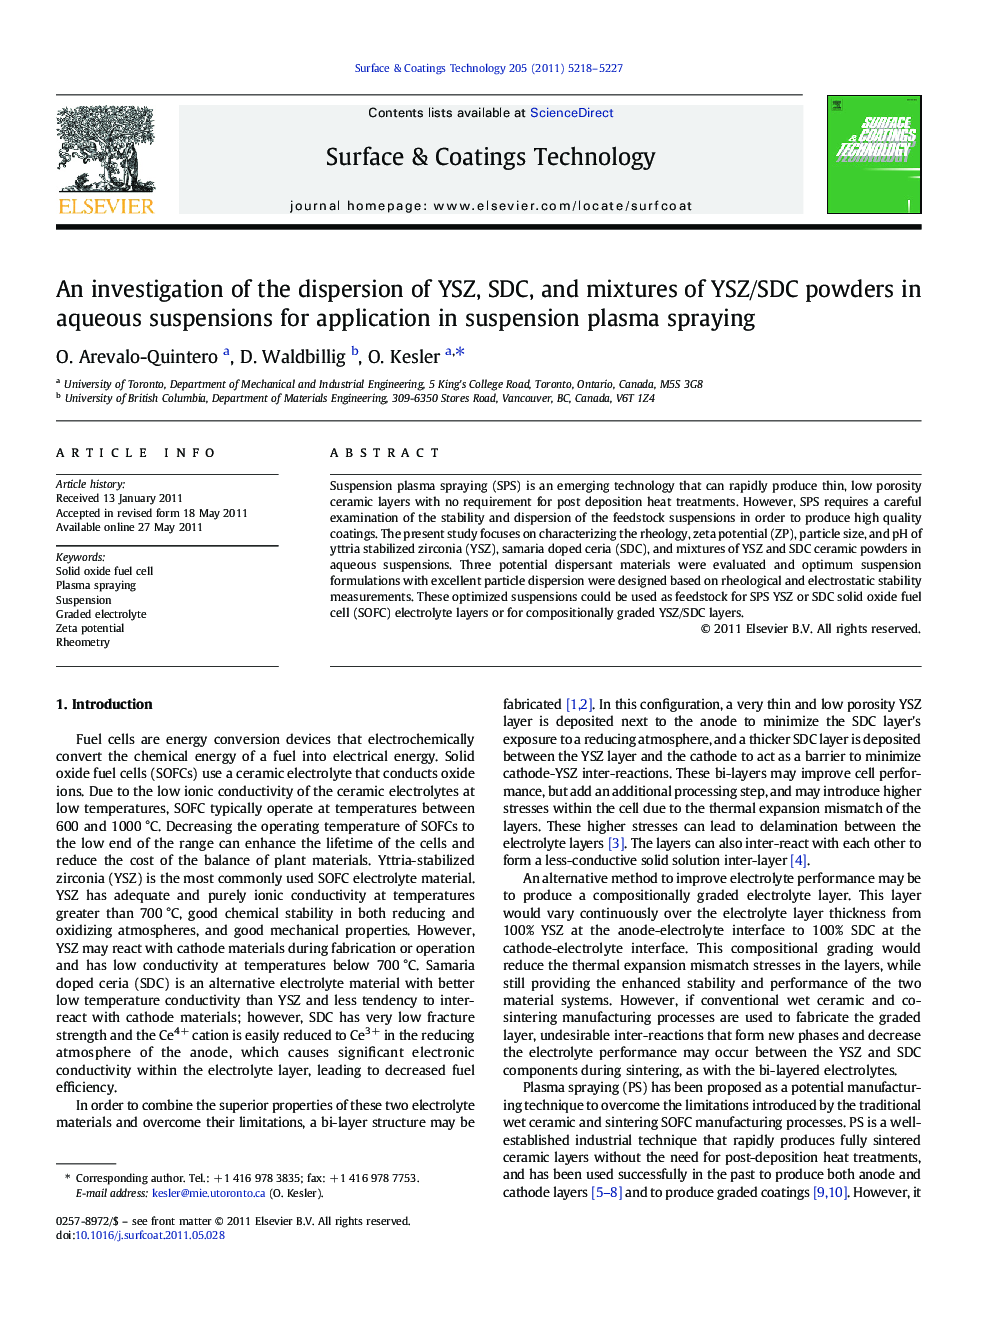 An investigation of the dispersion of YSZ, SDC, and mixtures of YSZ/SDC powders in aqueous suspensions for application in suspension plasma spraying